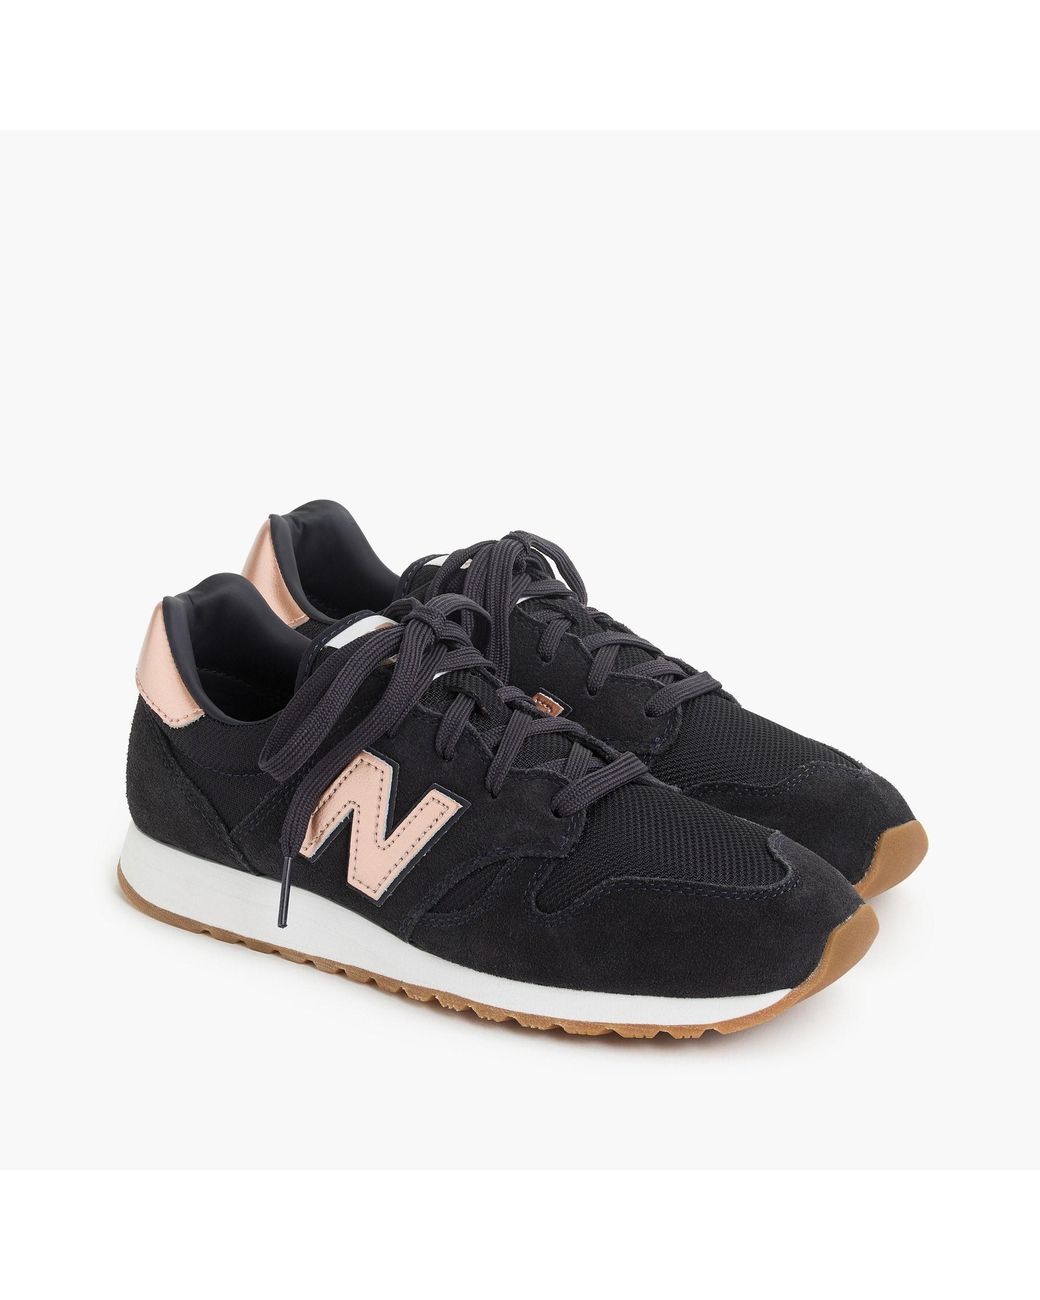 New Balance Suede Women's ® For J.crew 520 Sneakers in Navy Rose Gold ...